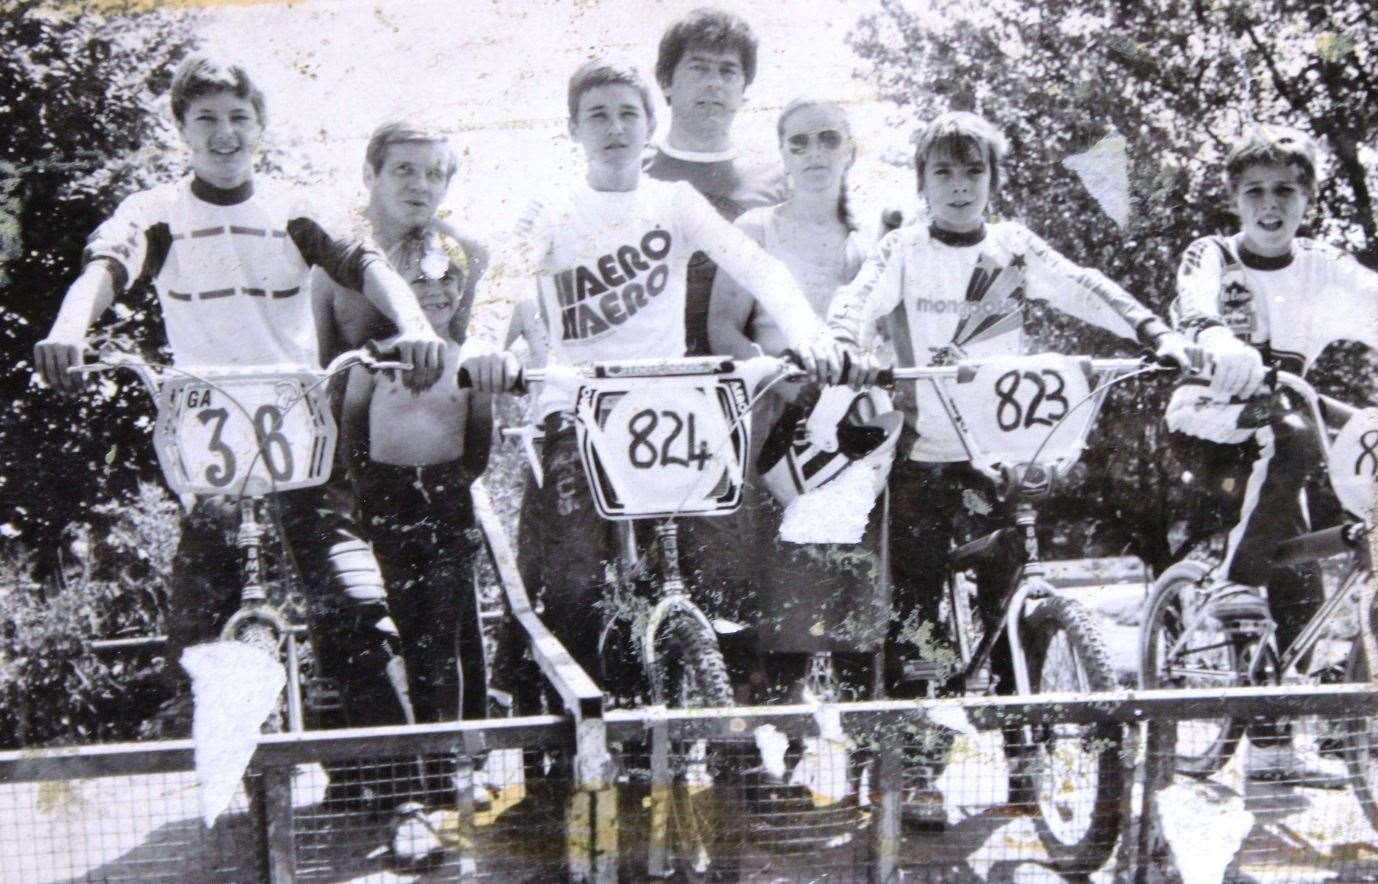 In the 1980s the shop had its own BMX team